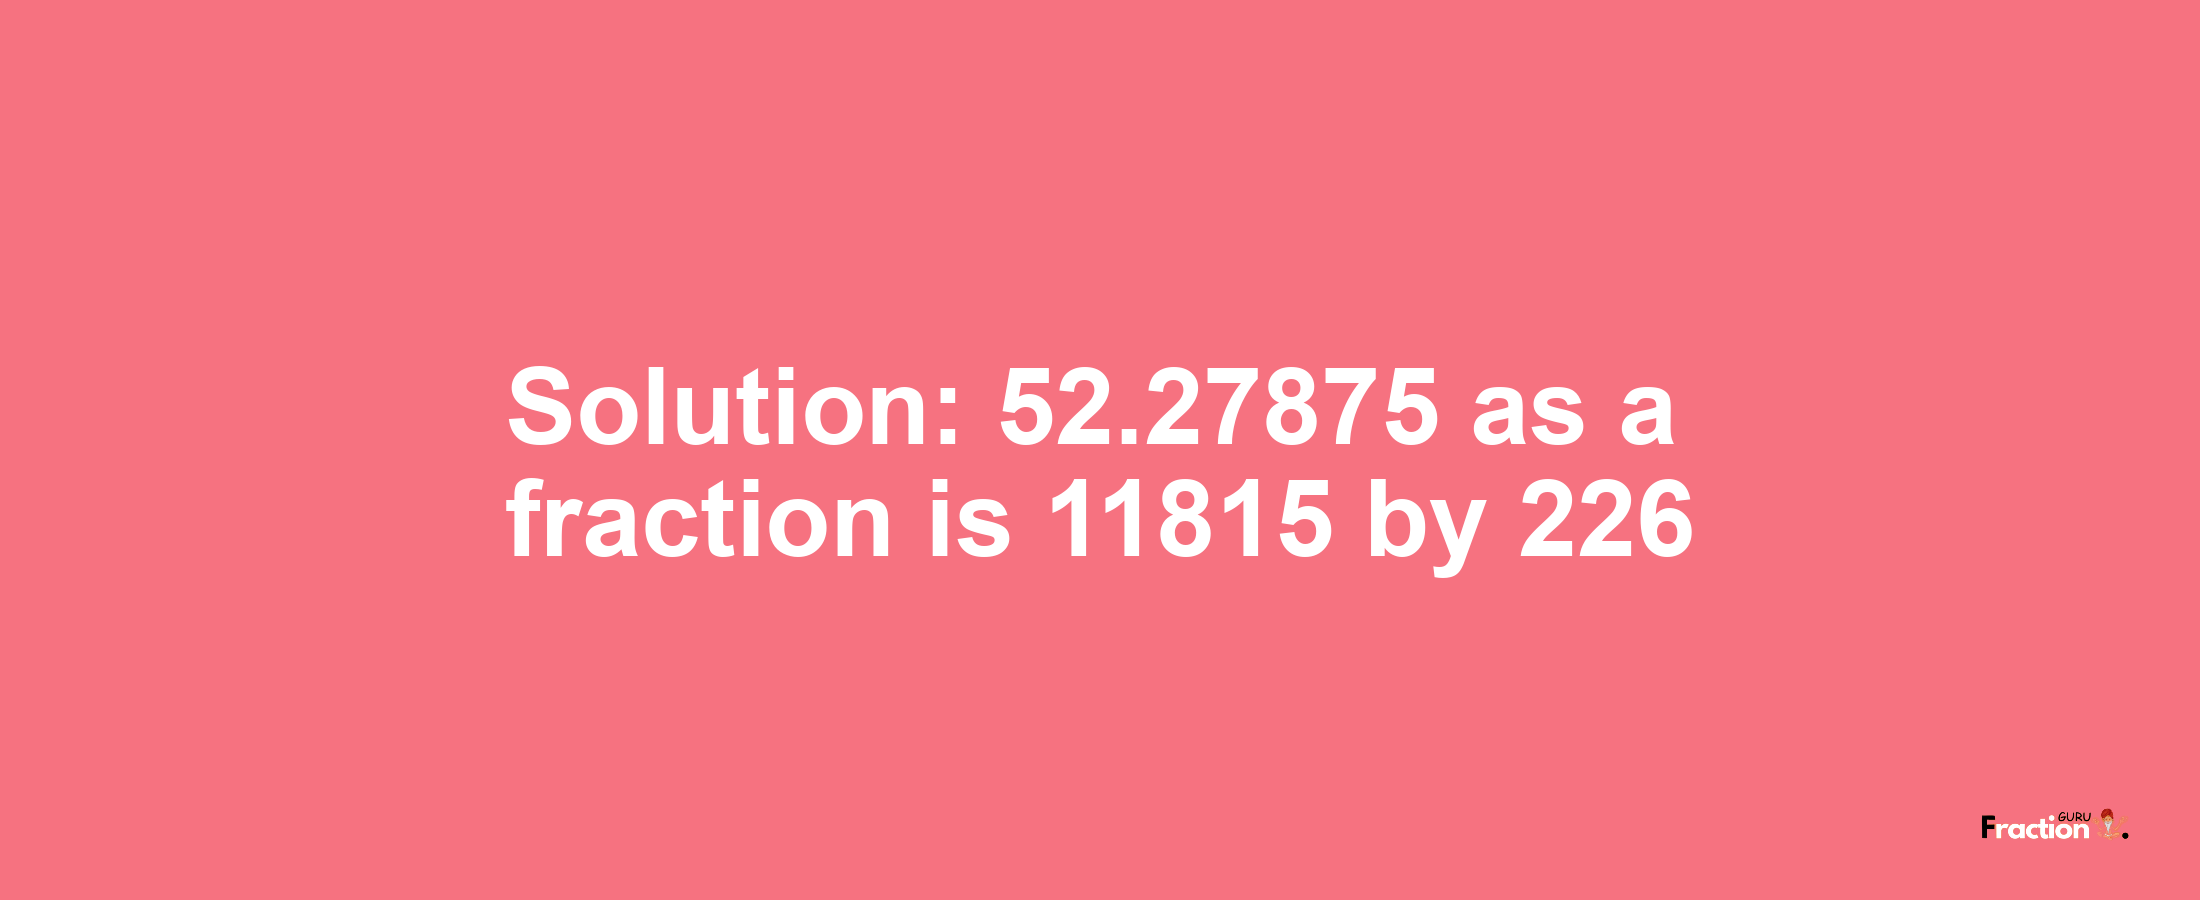 Solution:52.27875 as a fraction is 11815/226